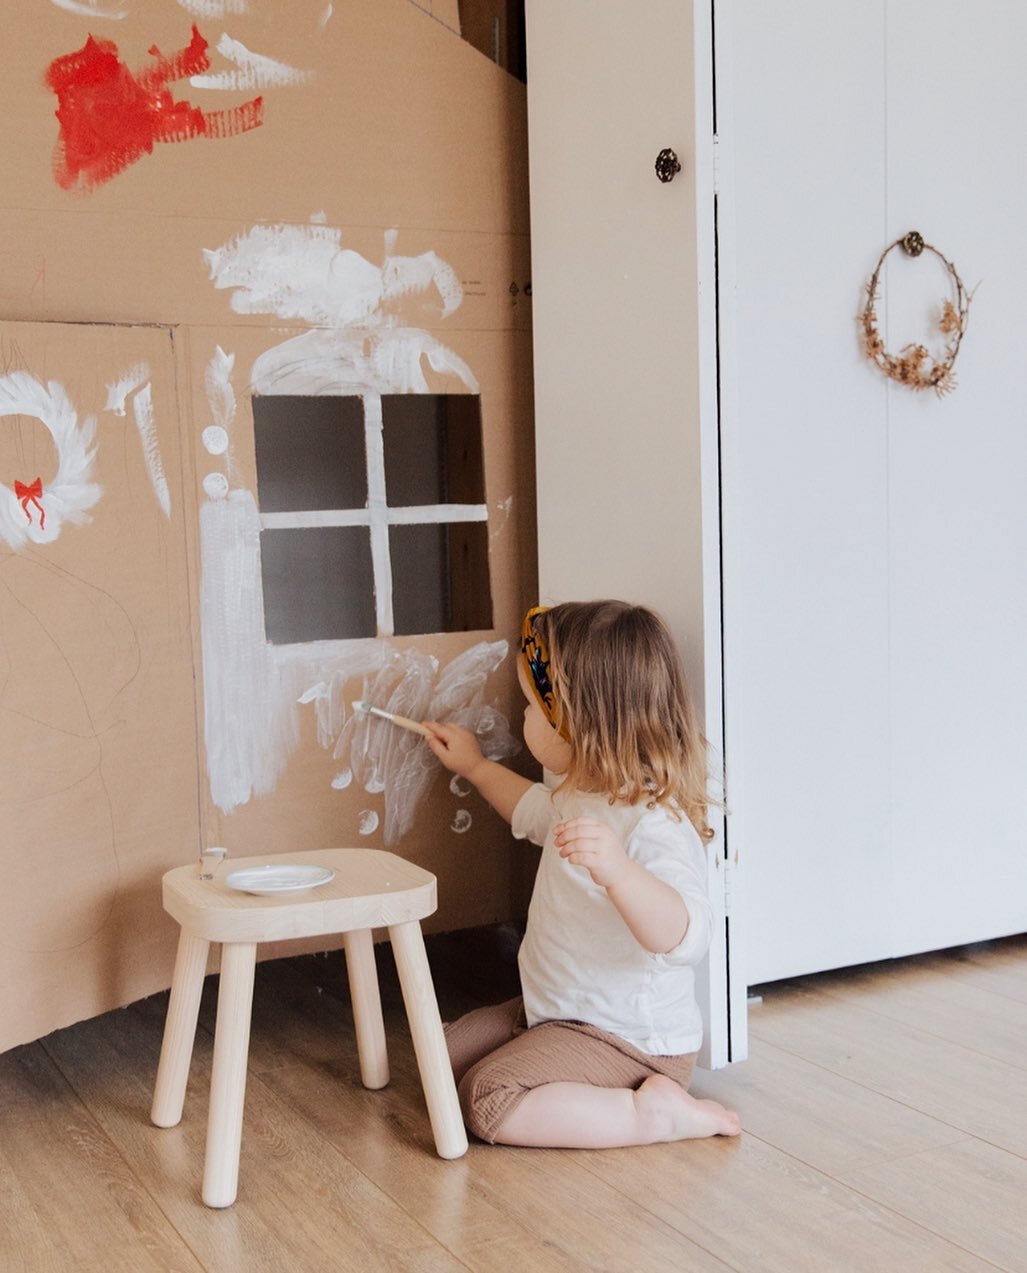 Life is never what we expect. And that&rsquo;s beautiful. 

When we&rsquo;re little, we start dreaming about the kind of life &ldquo;we&rsquo;re gonna live&rdquo;. We start painting scenarios and creating ideas in our heads of the perfect living situ